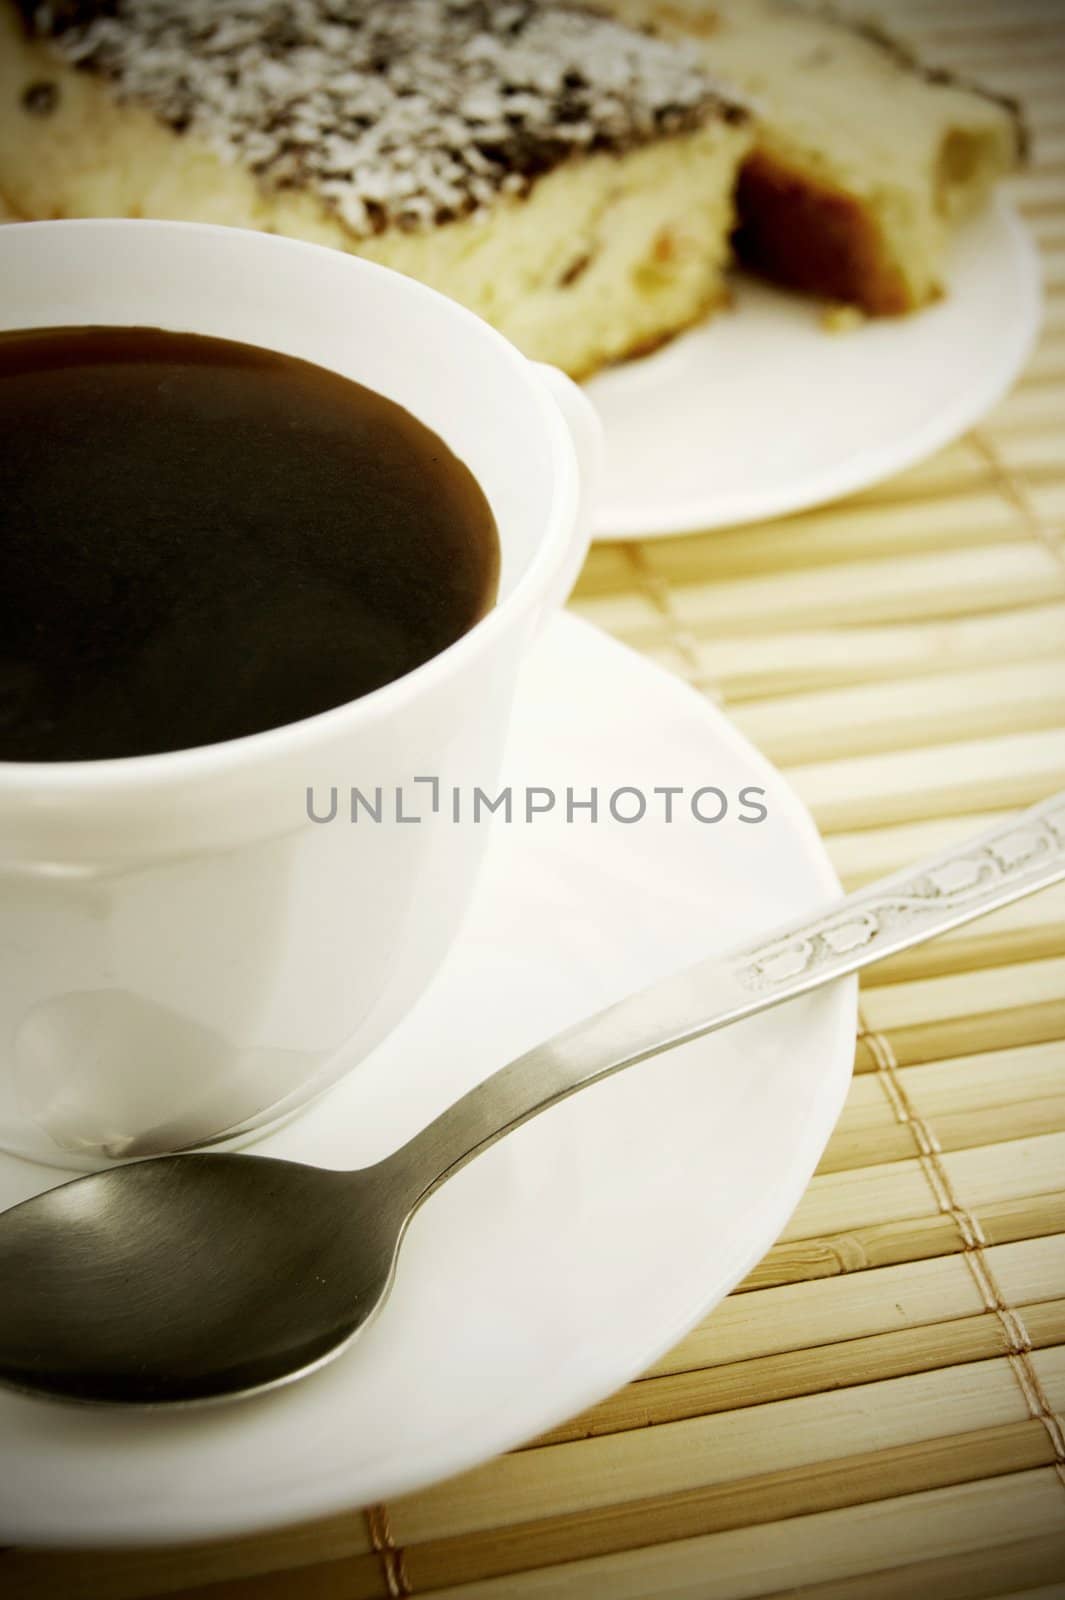 Coffee and cheesecake on bamboo mat by simpson33